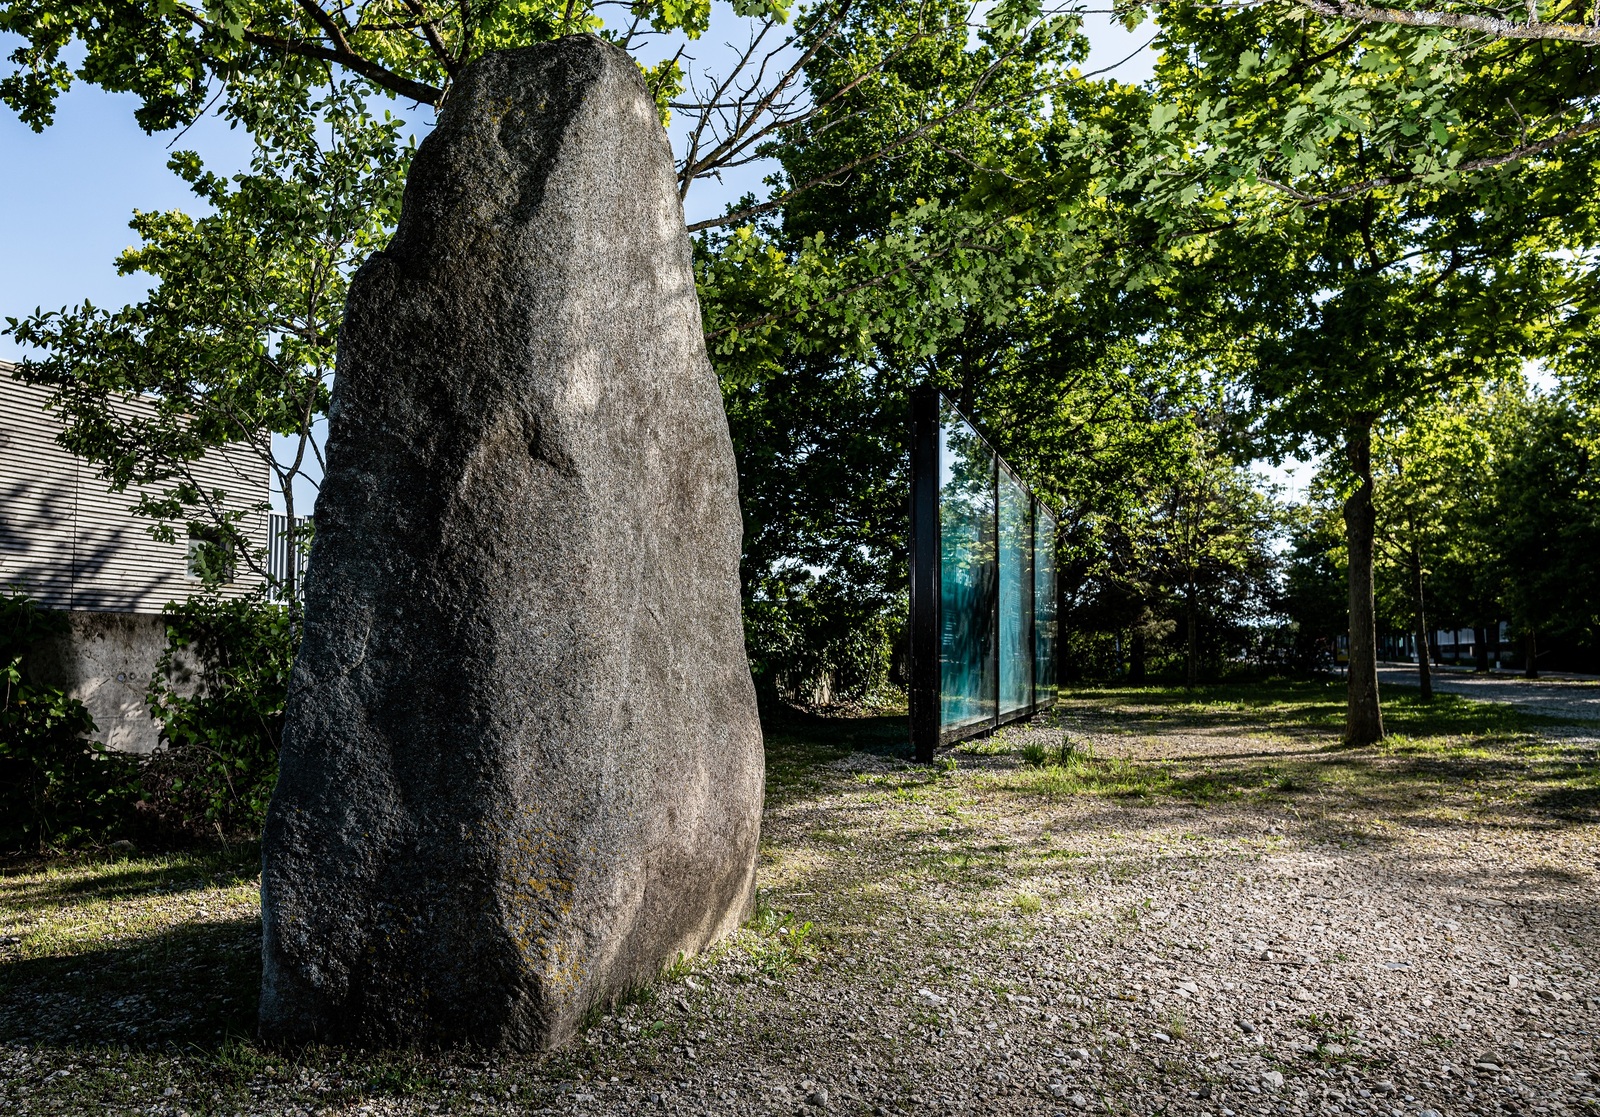 Menhir of Bevaix/Treytel placed at the entrance of the Laténium archaeological park